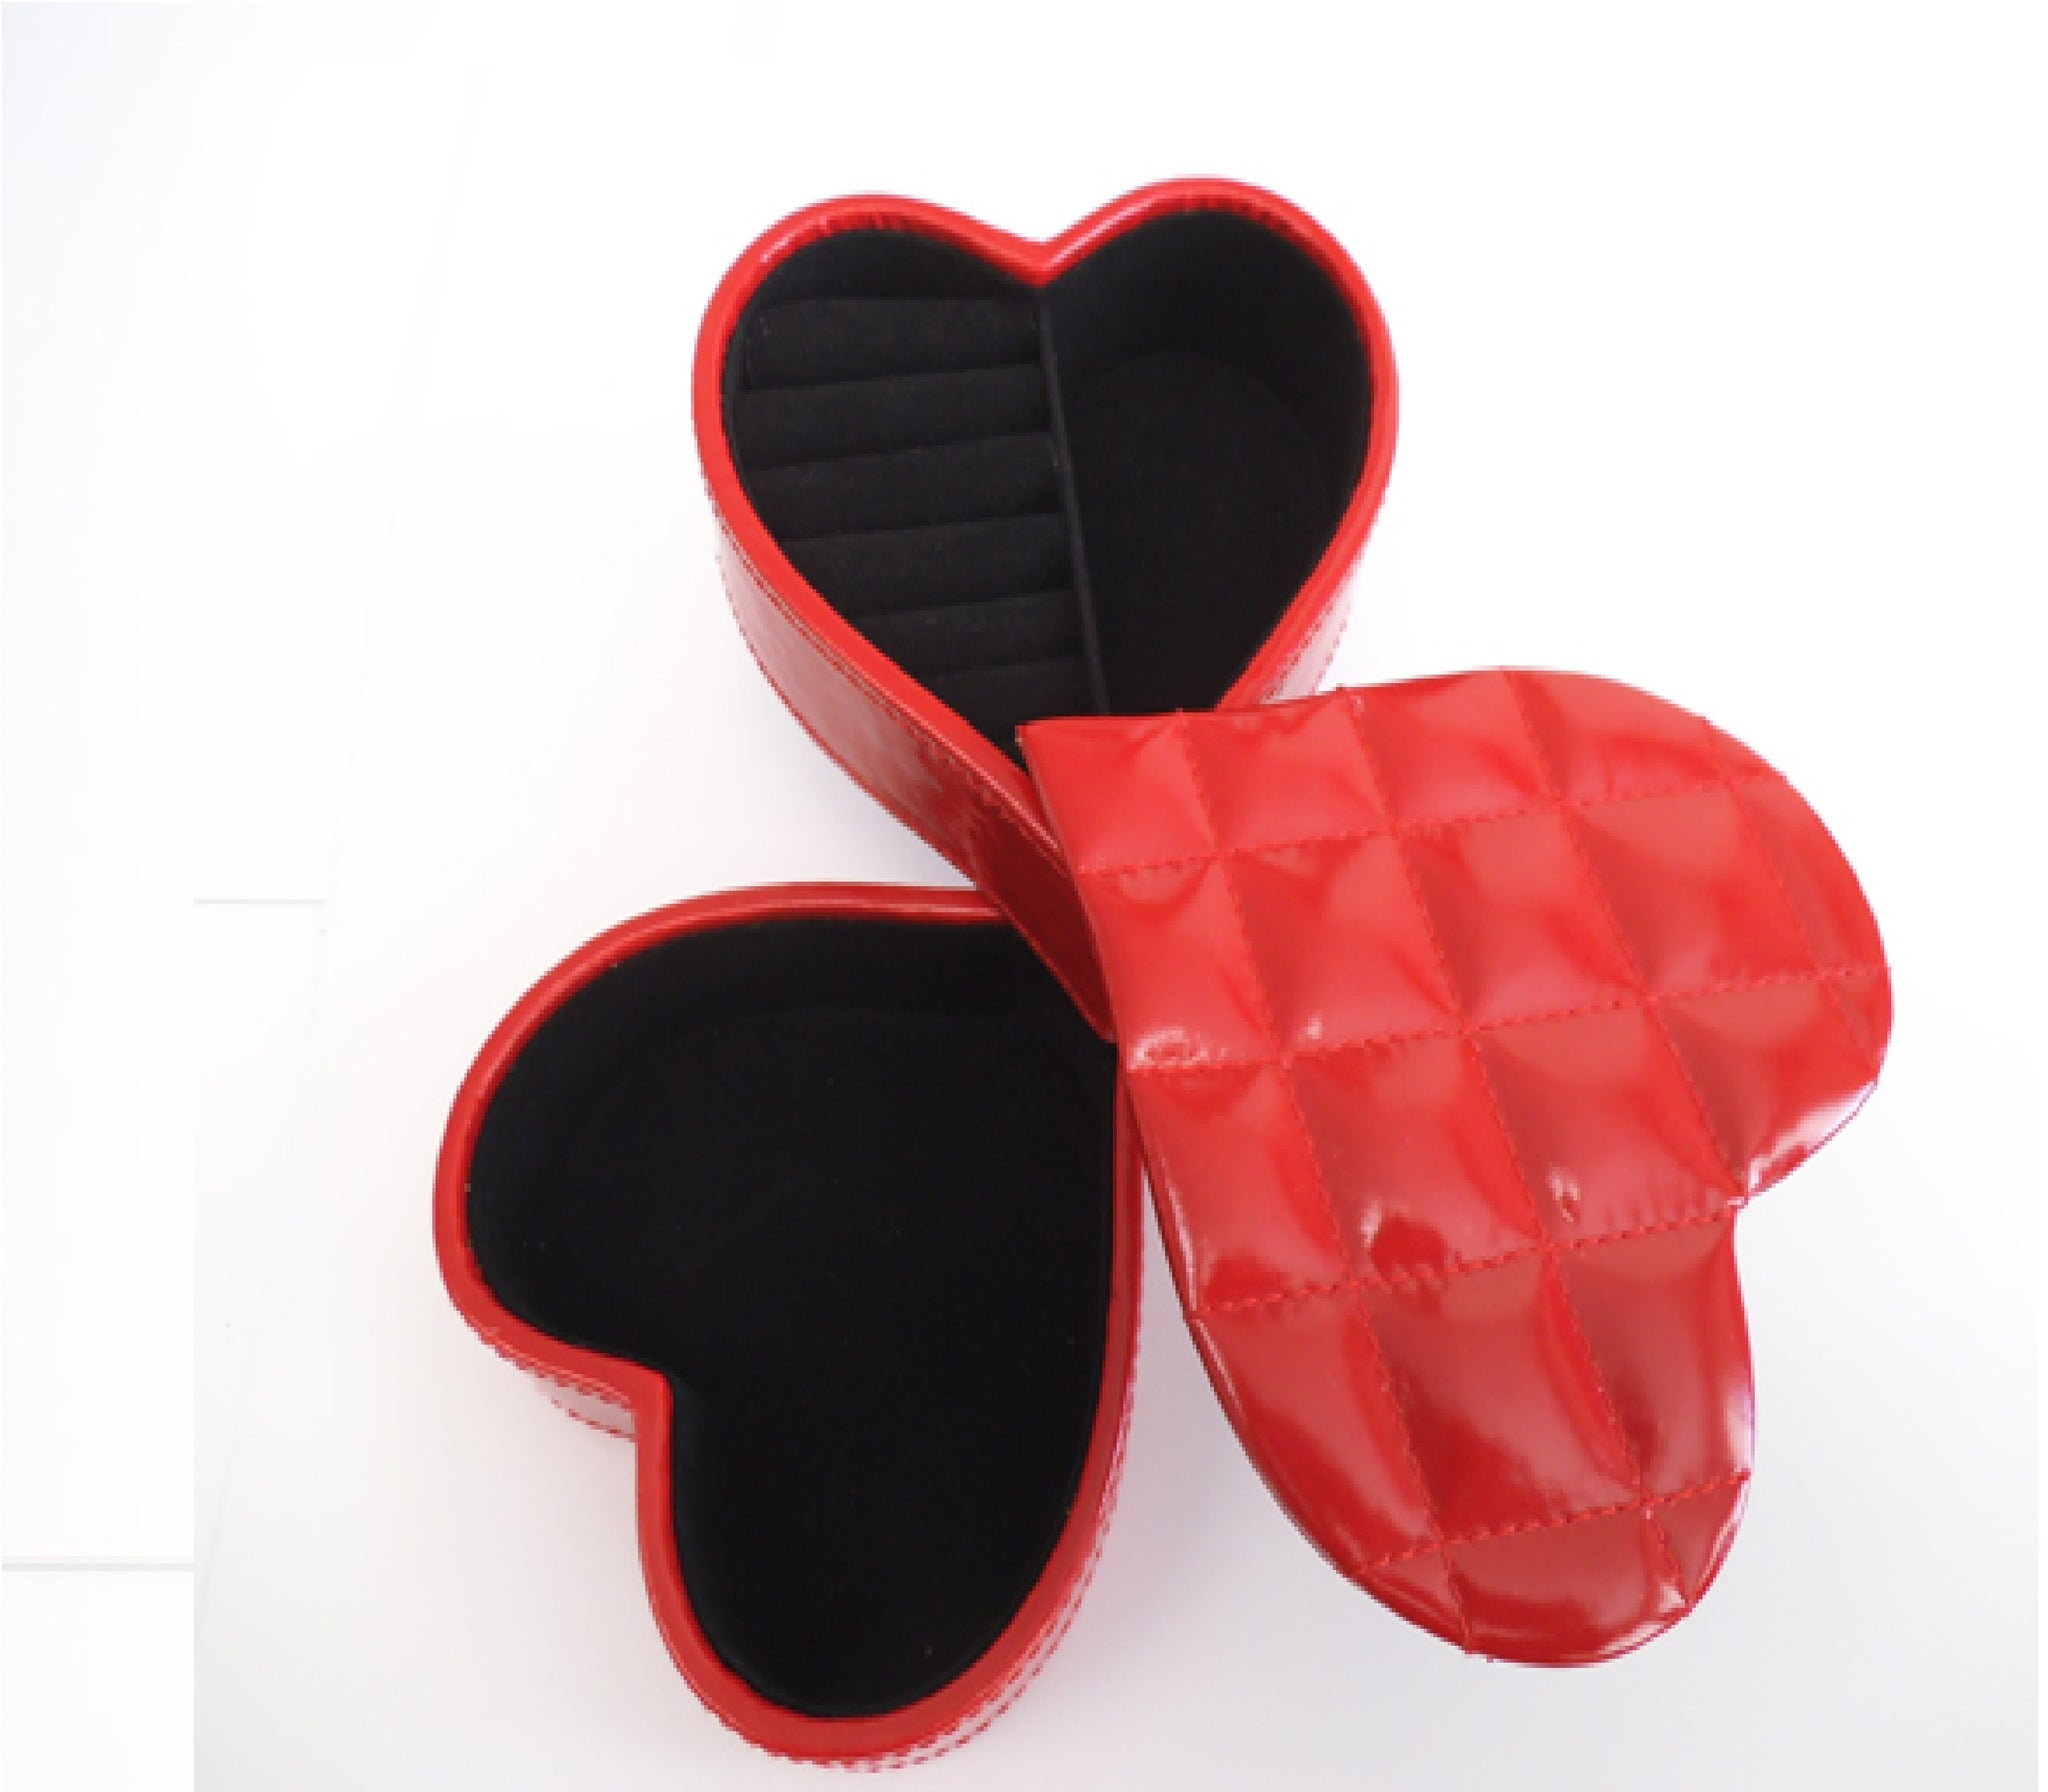 RED HEART LEATHER JEWELRY BOX